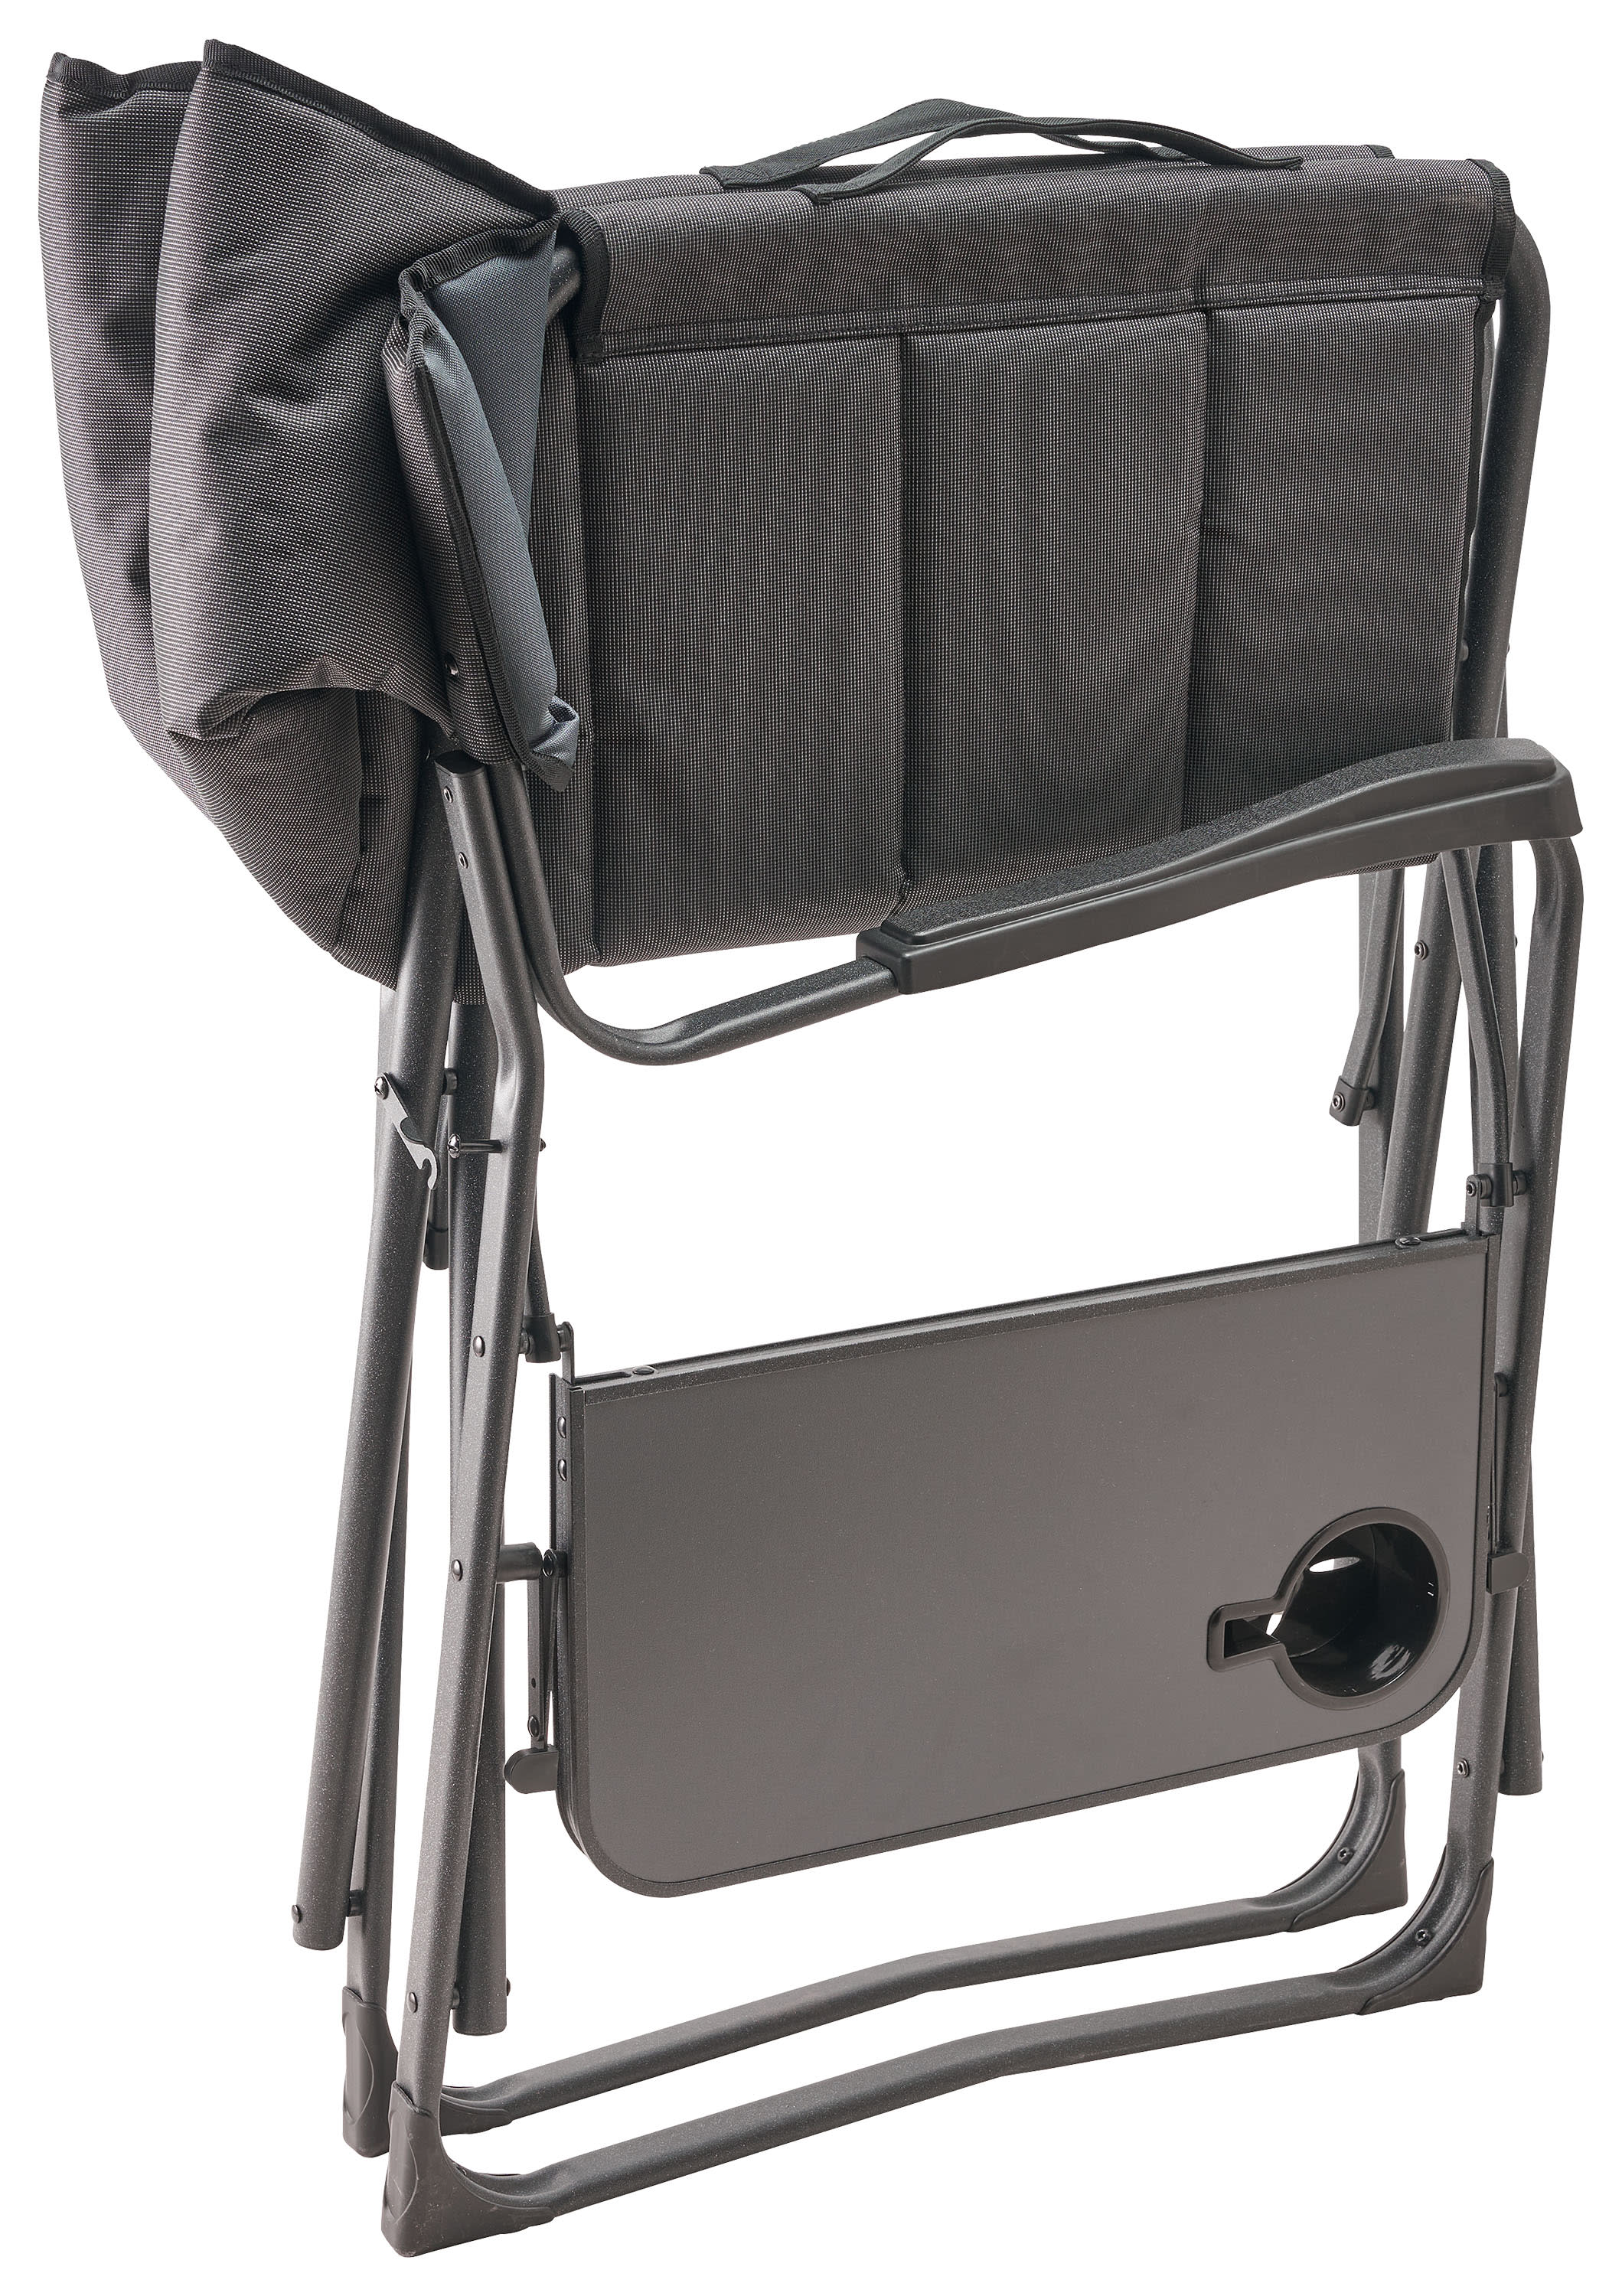 Cabela's® Big Outdoorsman Director's Chair with Side Table